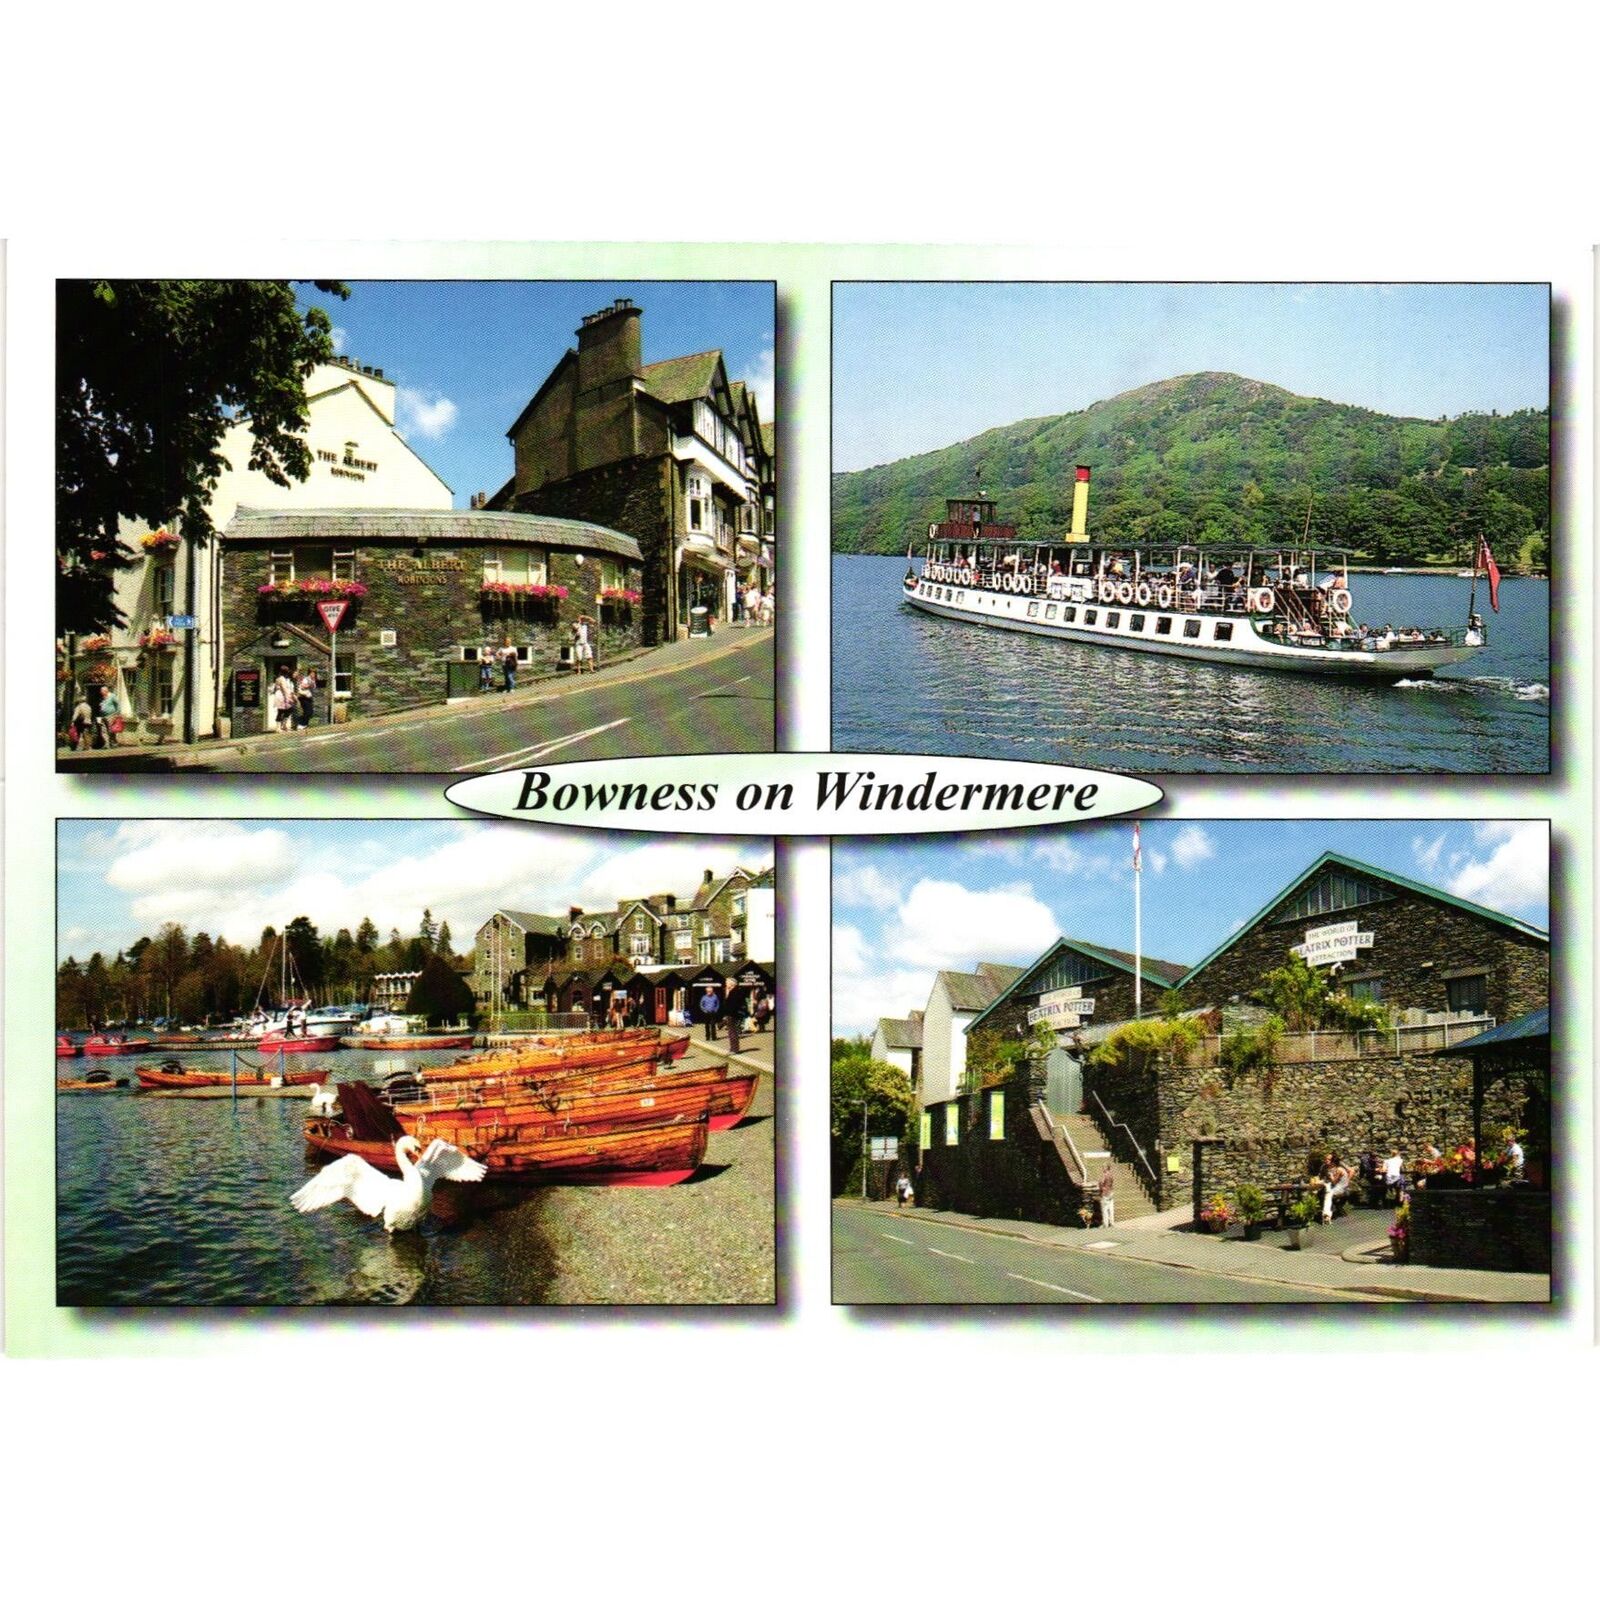 England UK Bowness of Windermere The World of Beatrice Potter Postcards Travel